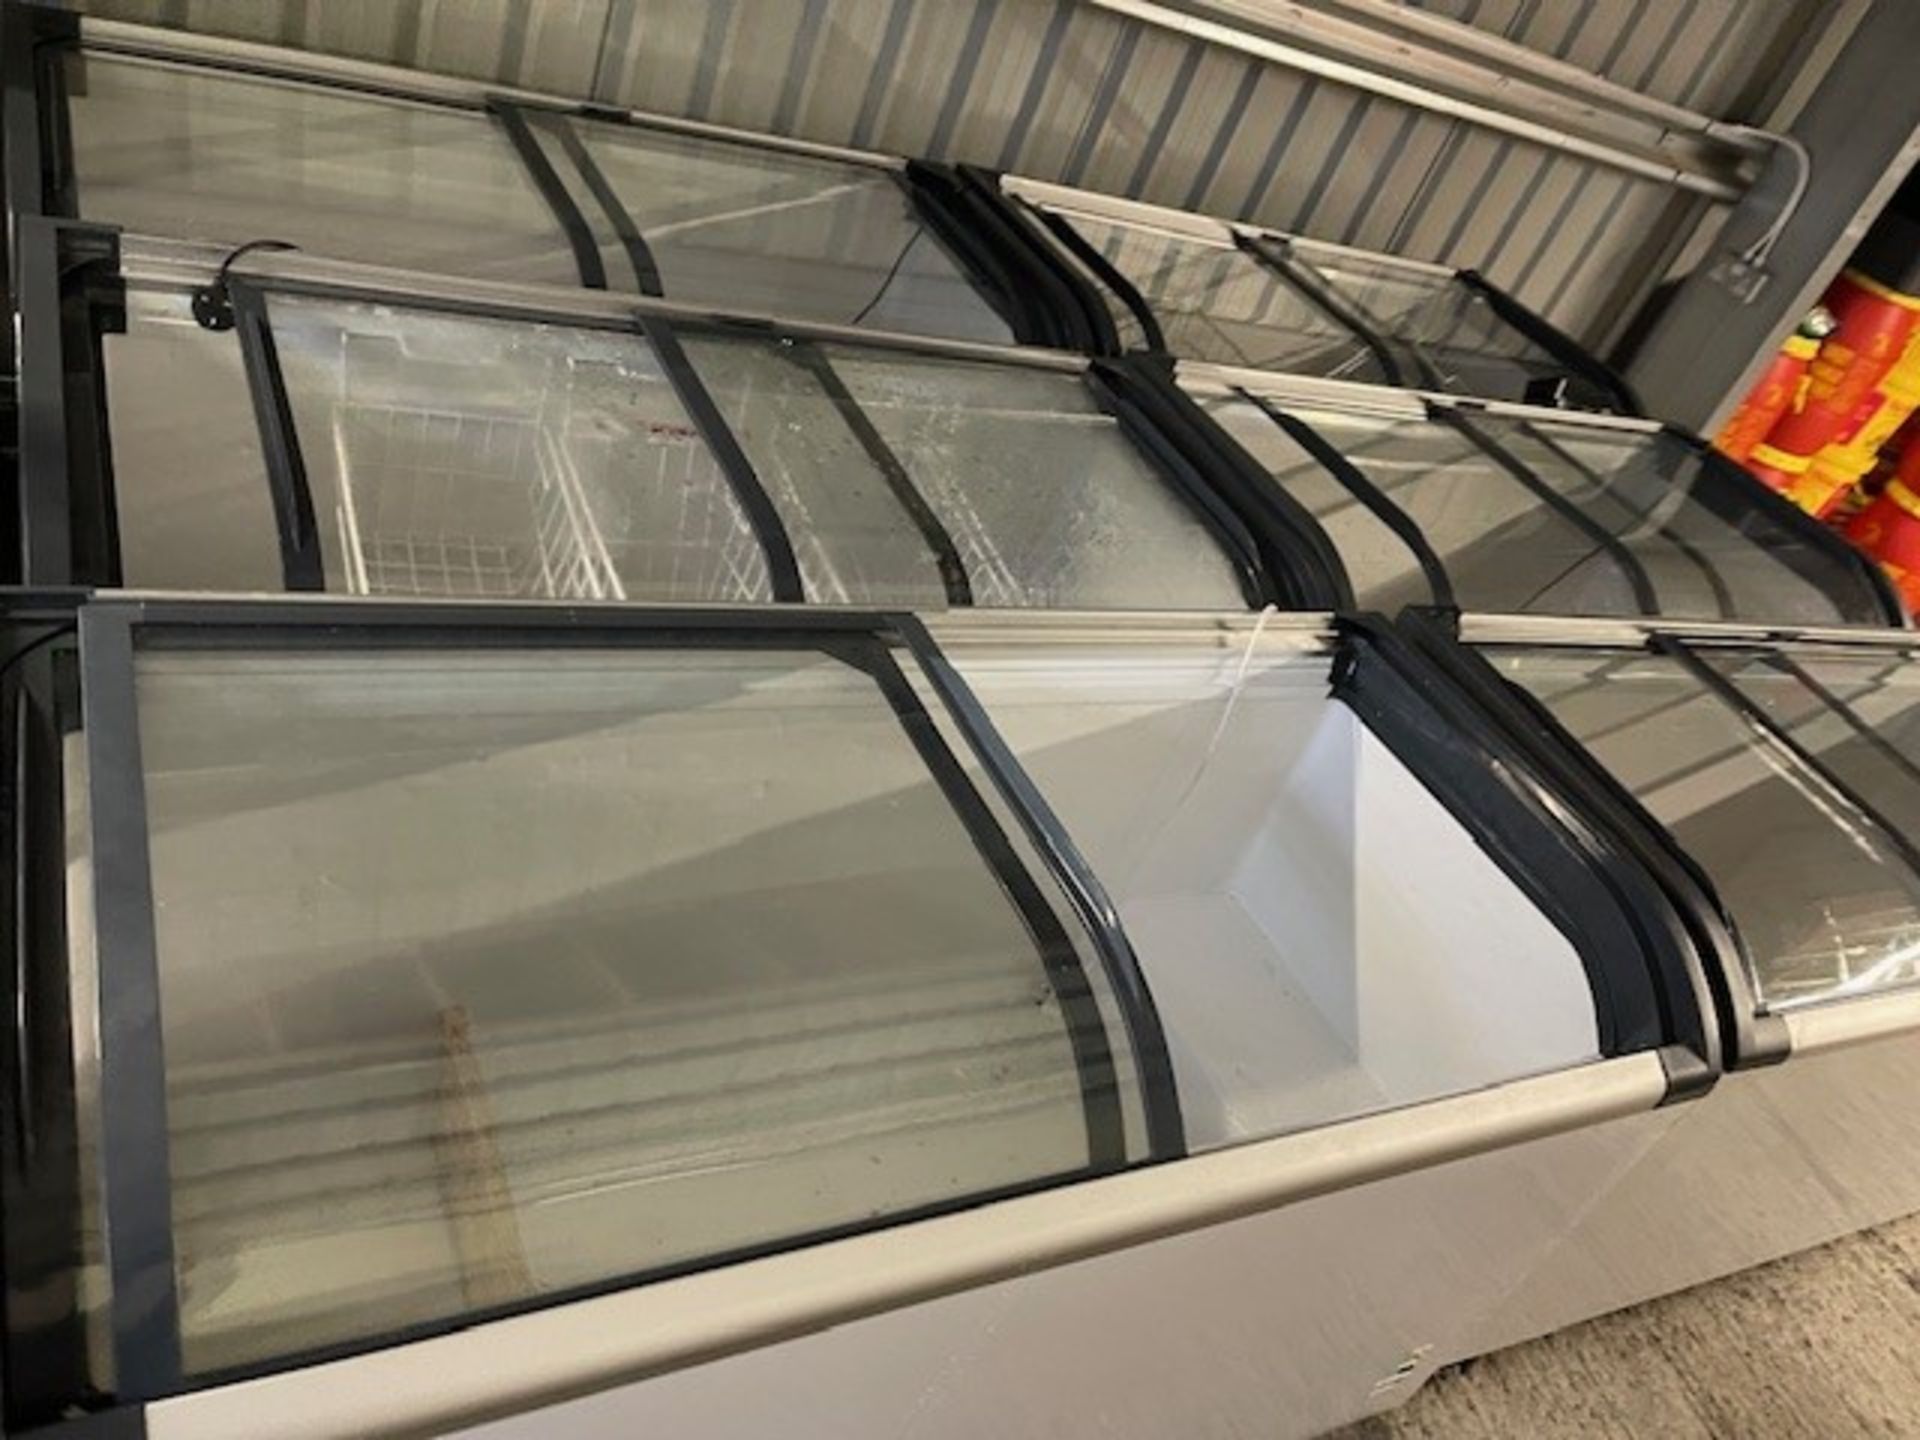 ADEXA SD-520Q CHEST FREEZER *** NOTE ASSET(S) LOCATED IN CROYDON - WILL REQUIRE REMOVAL BY FRIDAY - Image 4 of 9